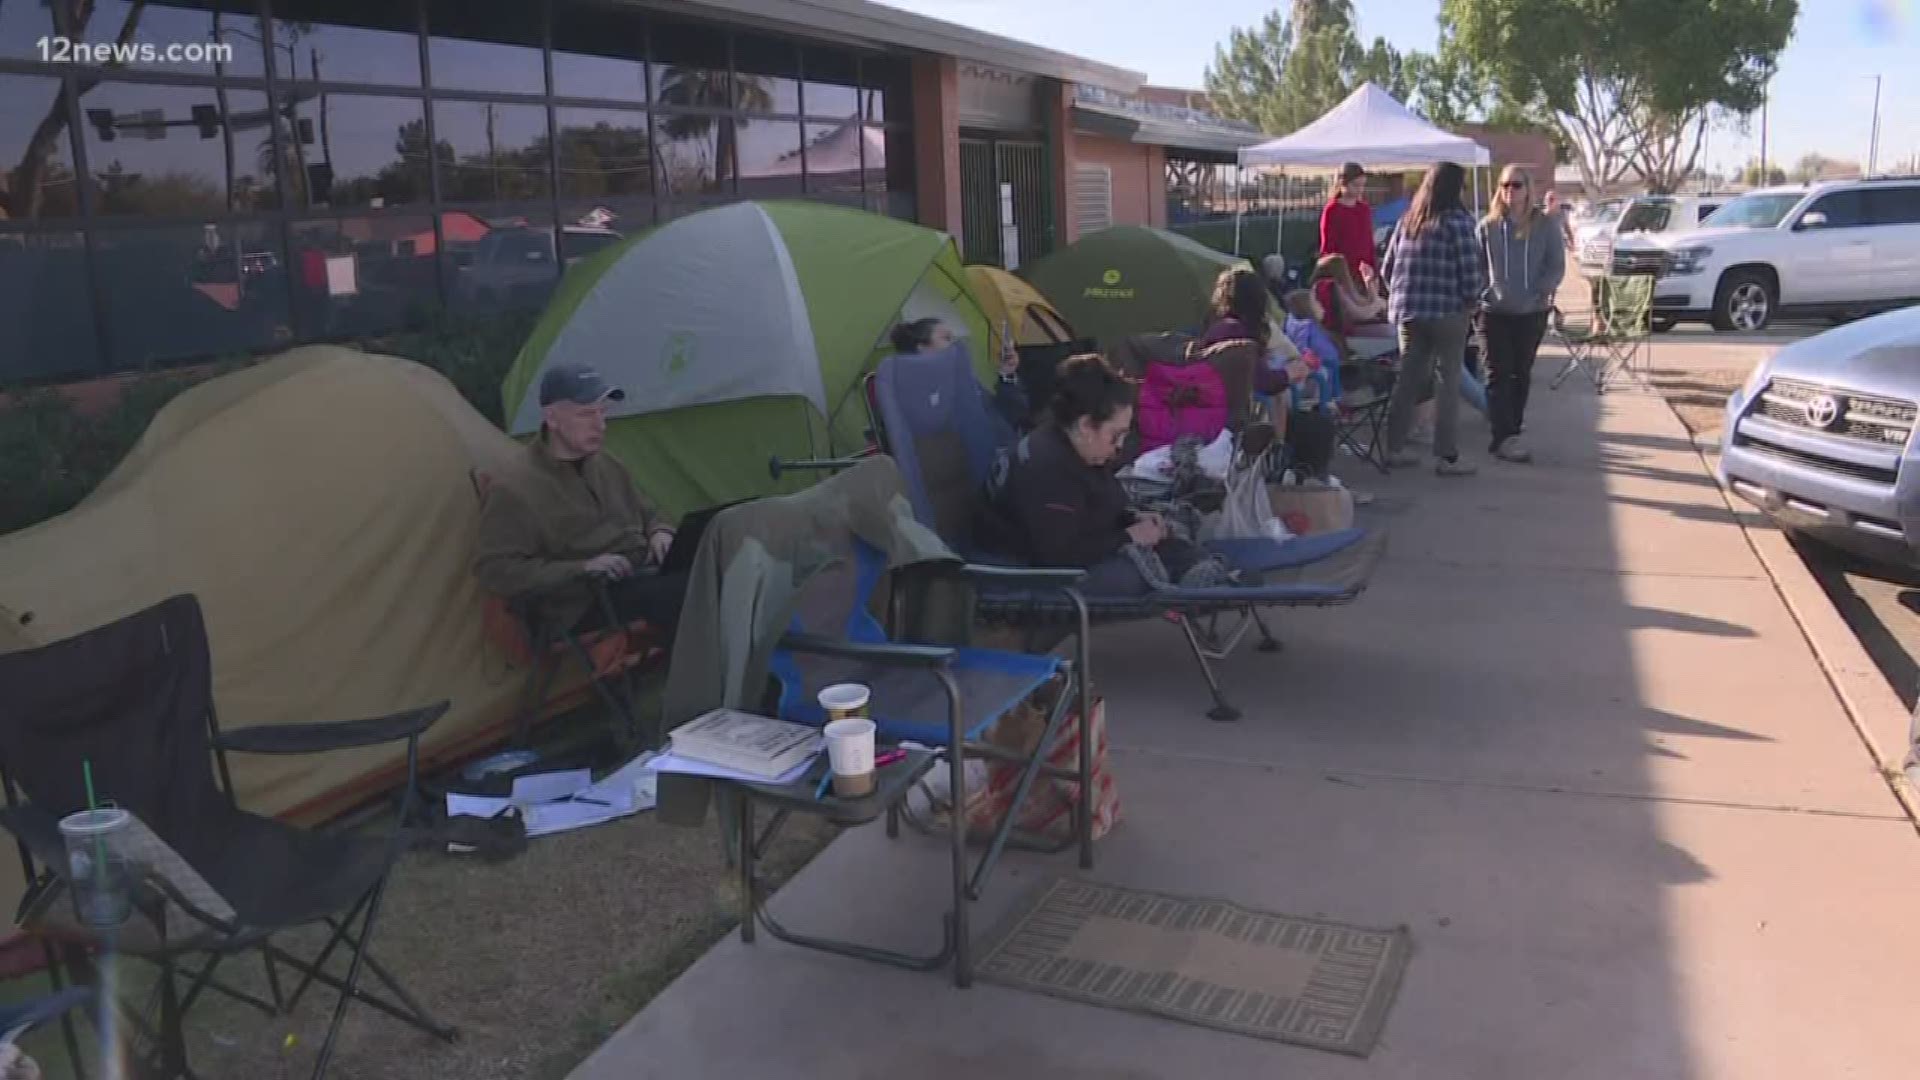 Many out-of-district parents are camping out to get their children enrolled in Sunnyslope High School. Team 12's Caribe Devine has the latest.